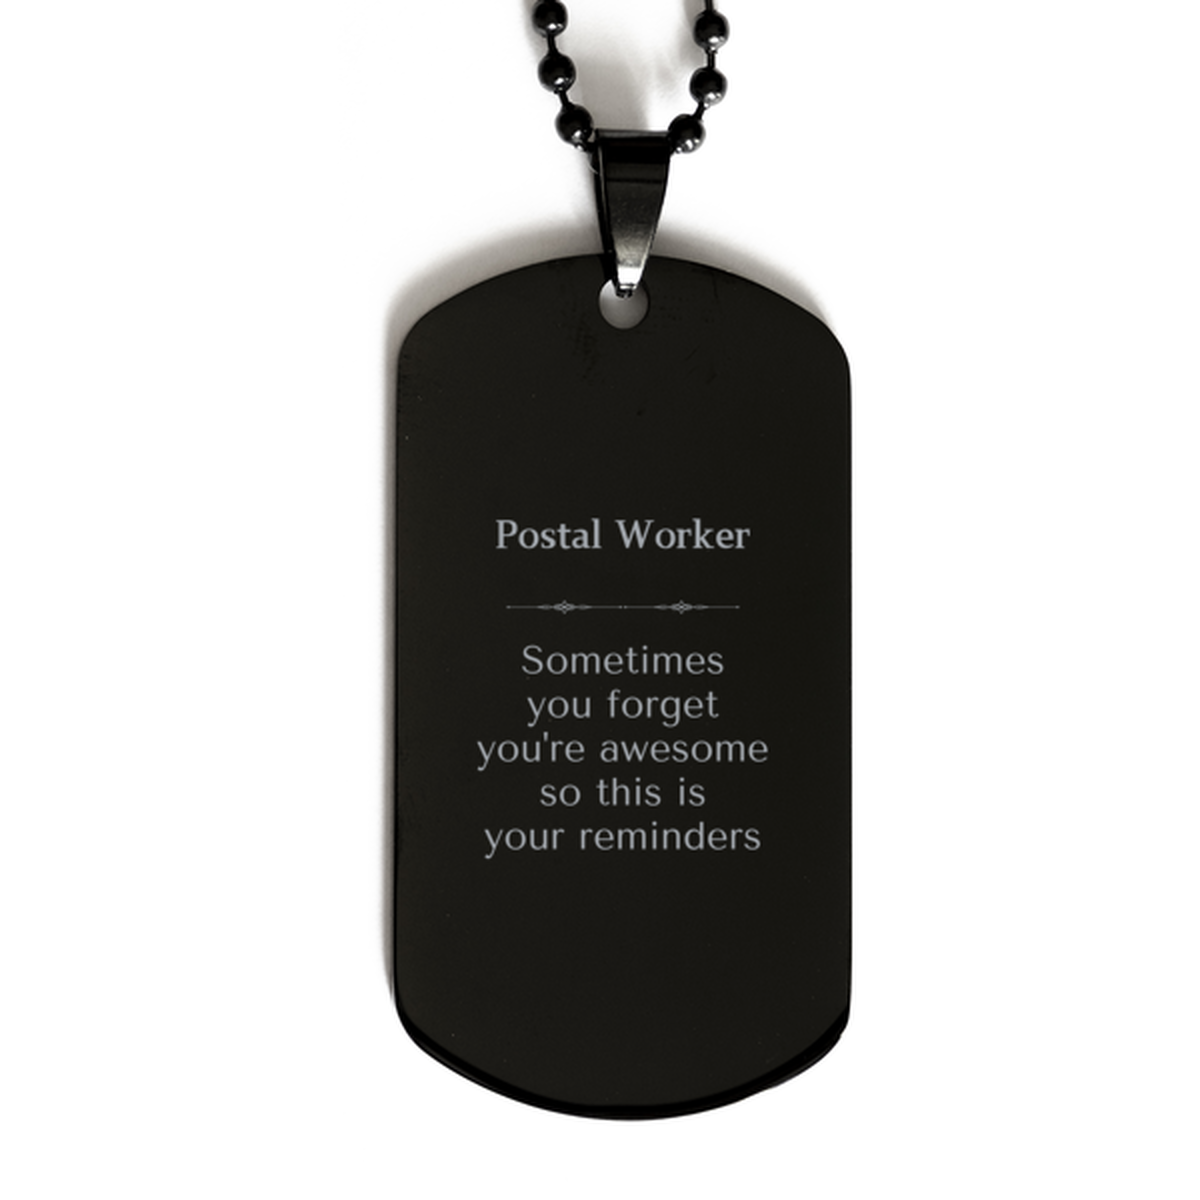 Sentimental Postal Worker Black Dog Tag, Postal Worker Sometimes you forget you're awesome so this is your reminders, Graduation Christmas Birthday Gifts for Postal Worker, Men, Women, Coworkers